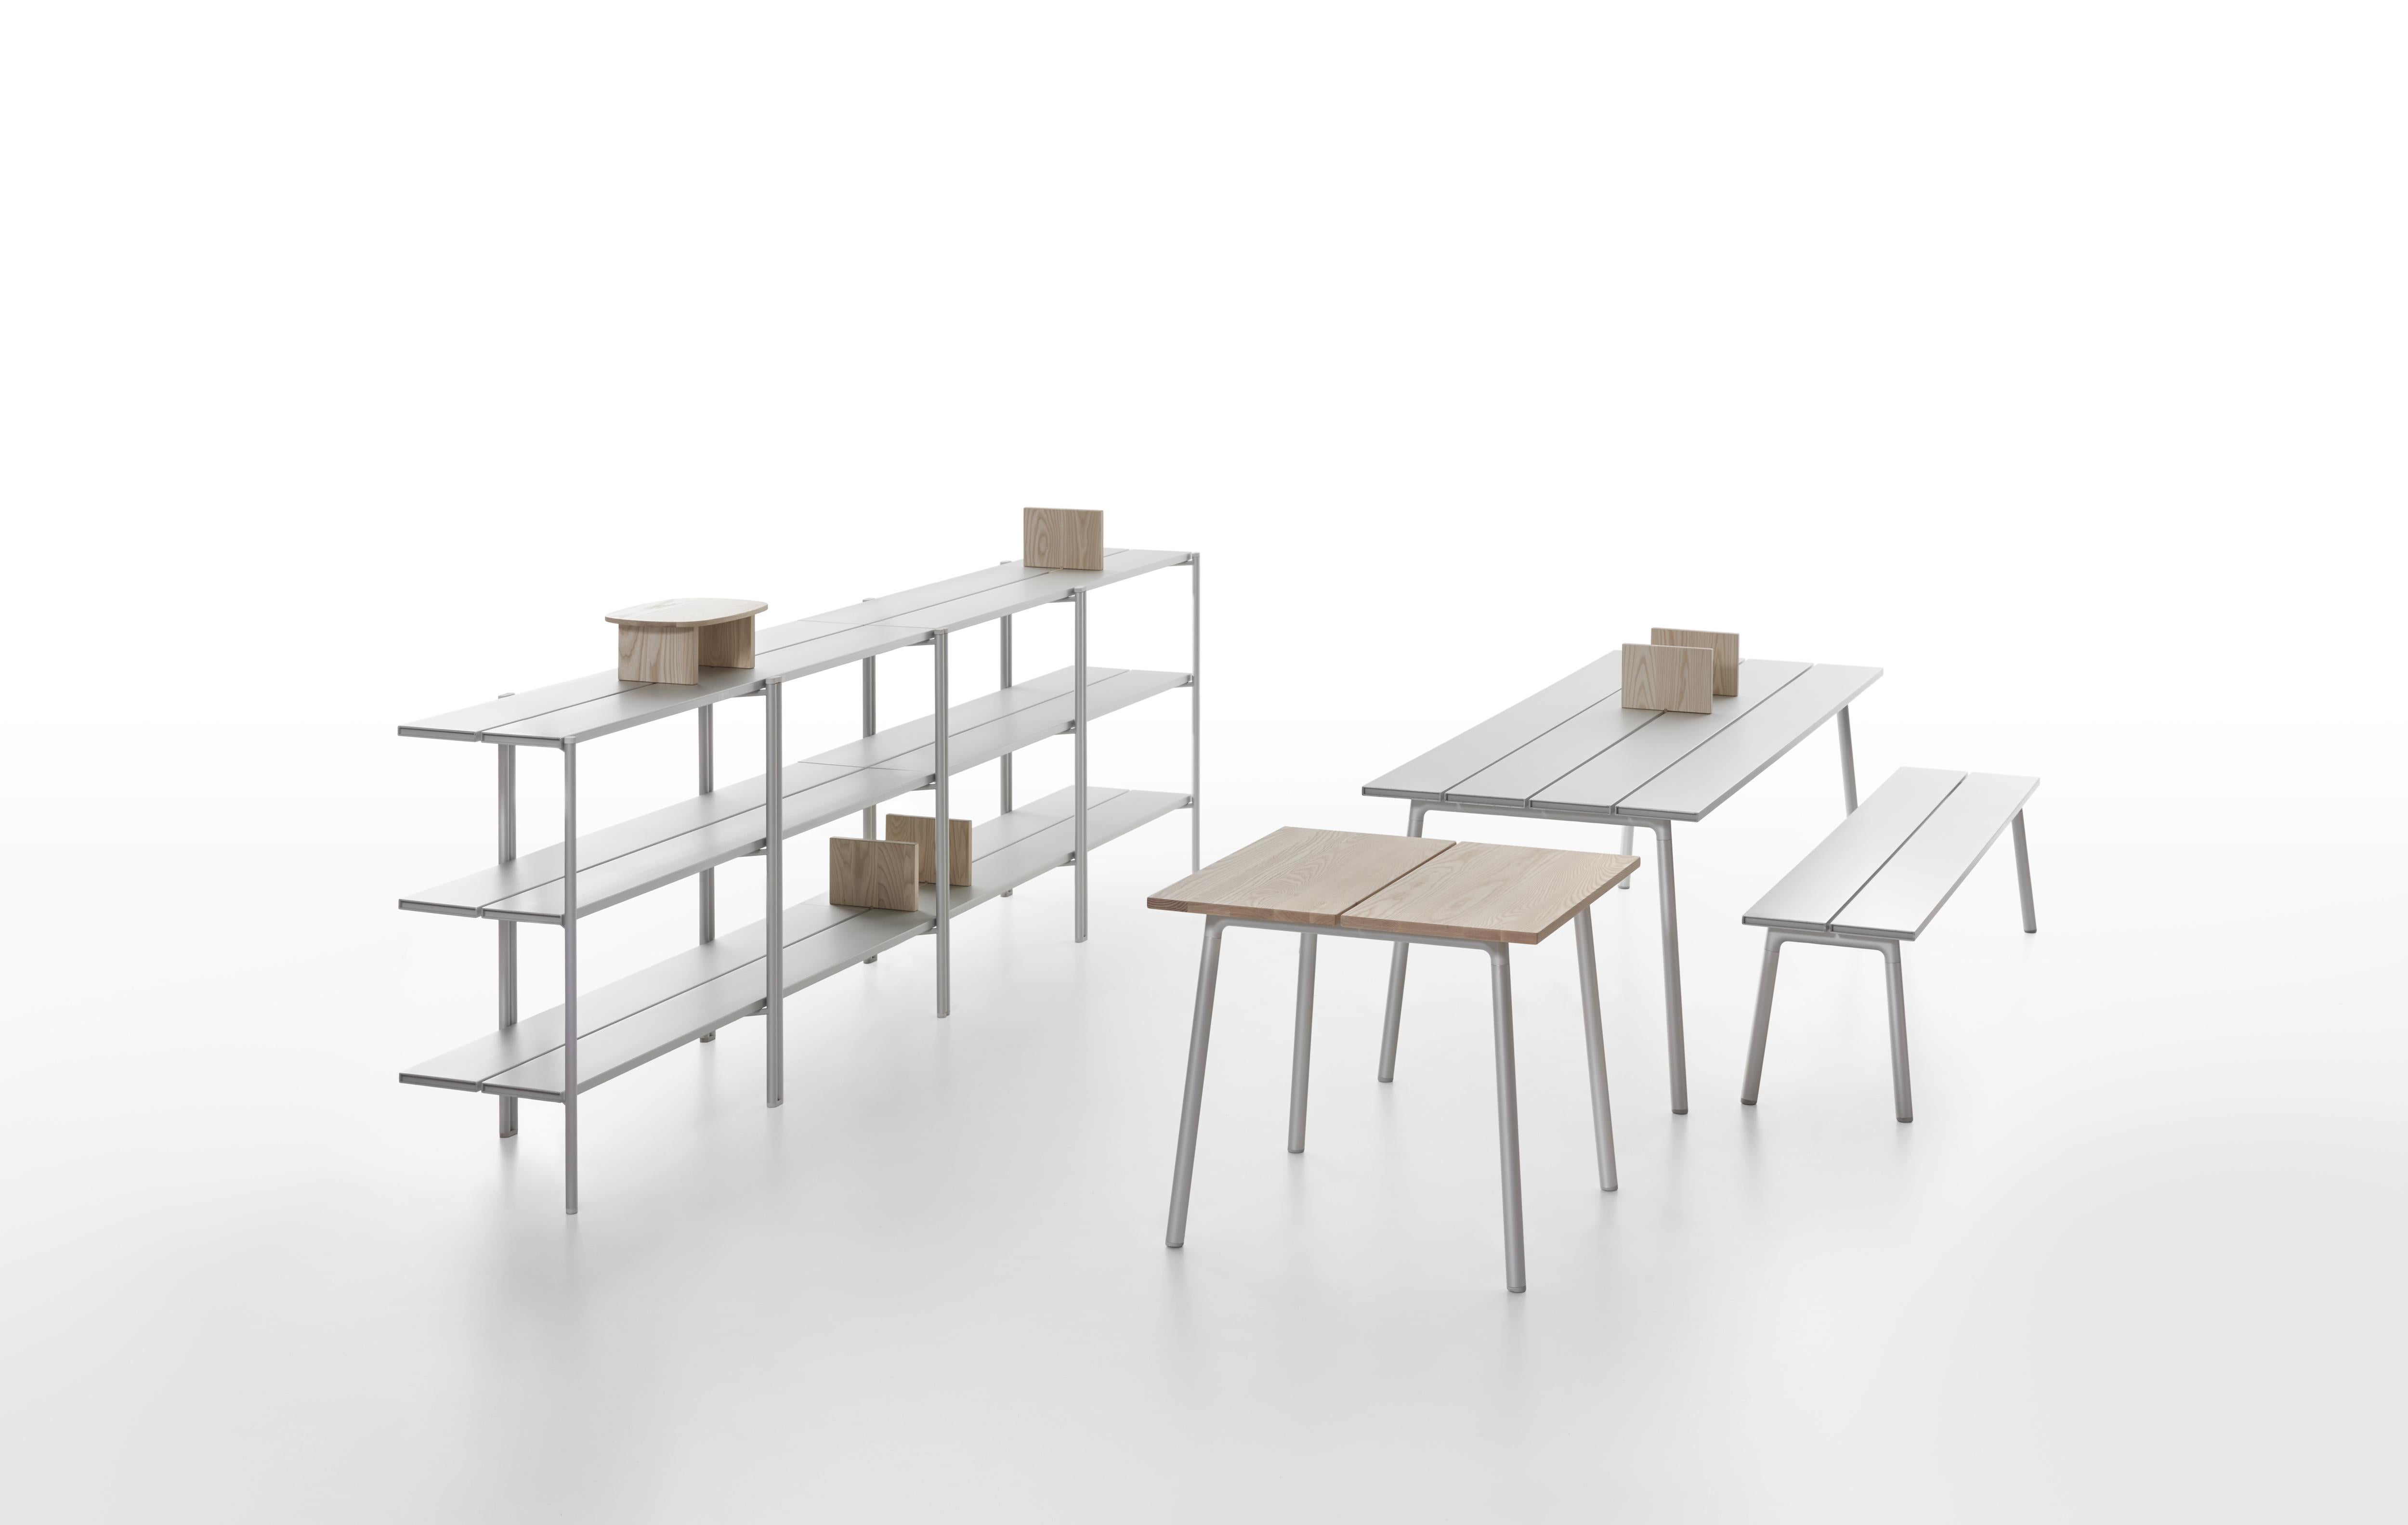 American Emeco Run 3-Seat Bench in Aluminum and Cedar by Sam Hecht and Kim Colin